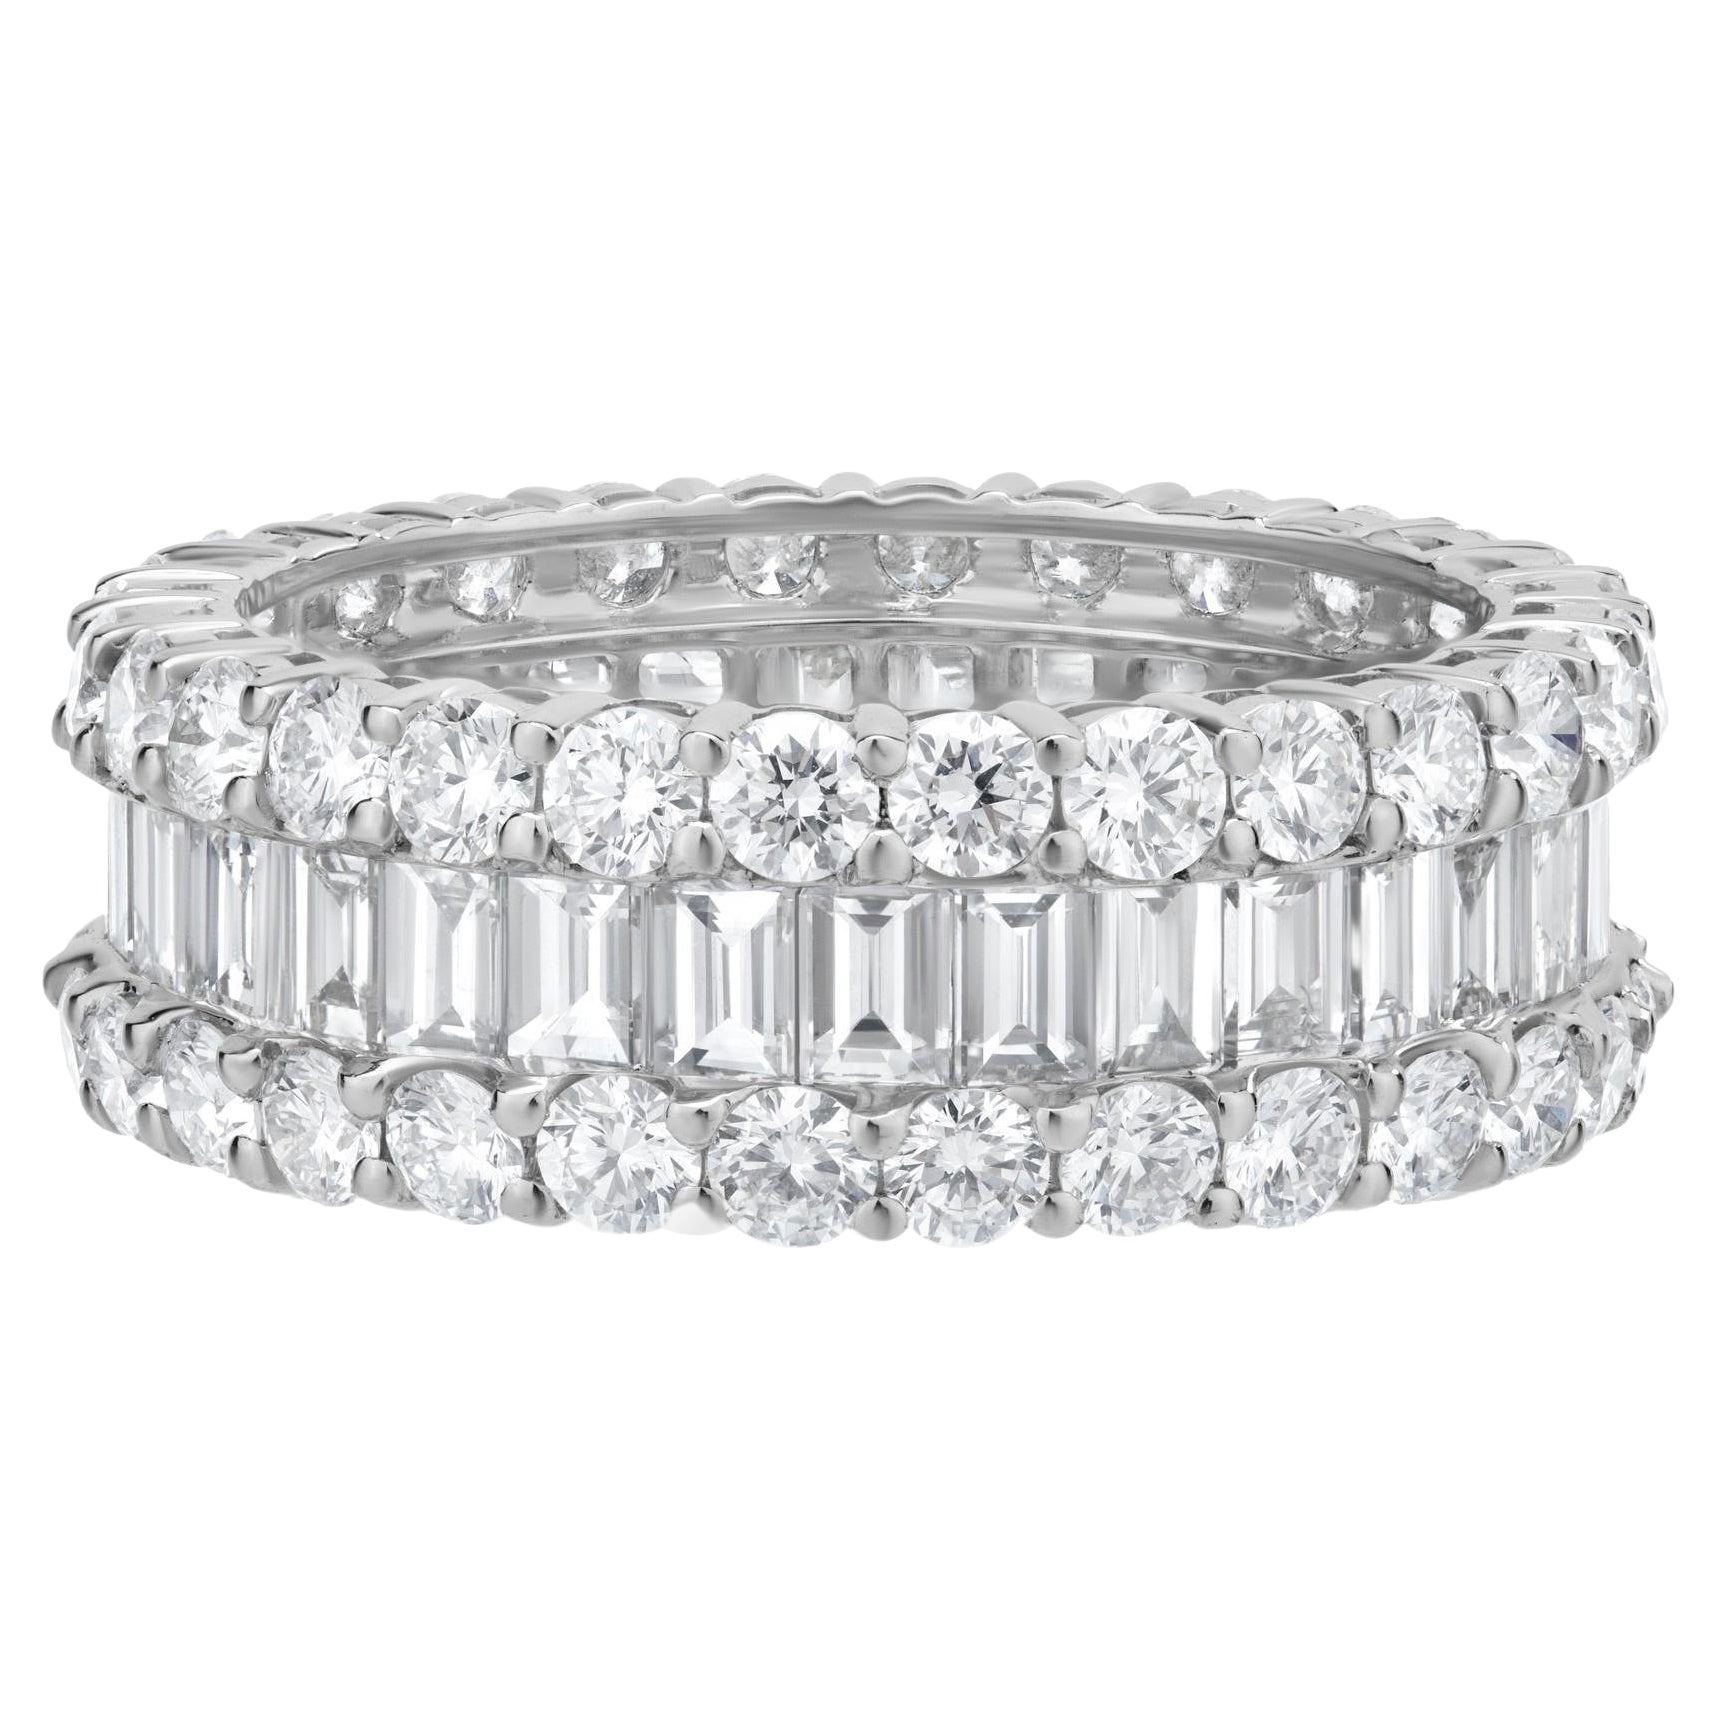 Nigaam 5.4 Carat T.W Baguette and Round Diamond Band Ring in 18k White Gold